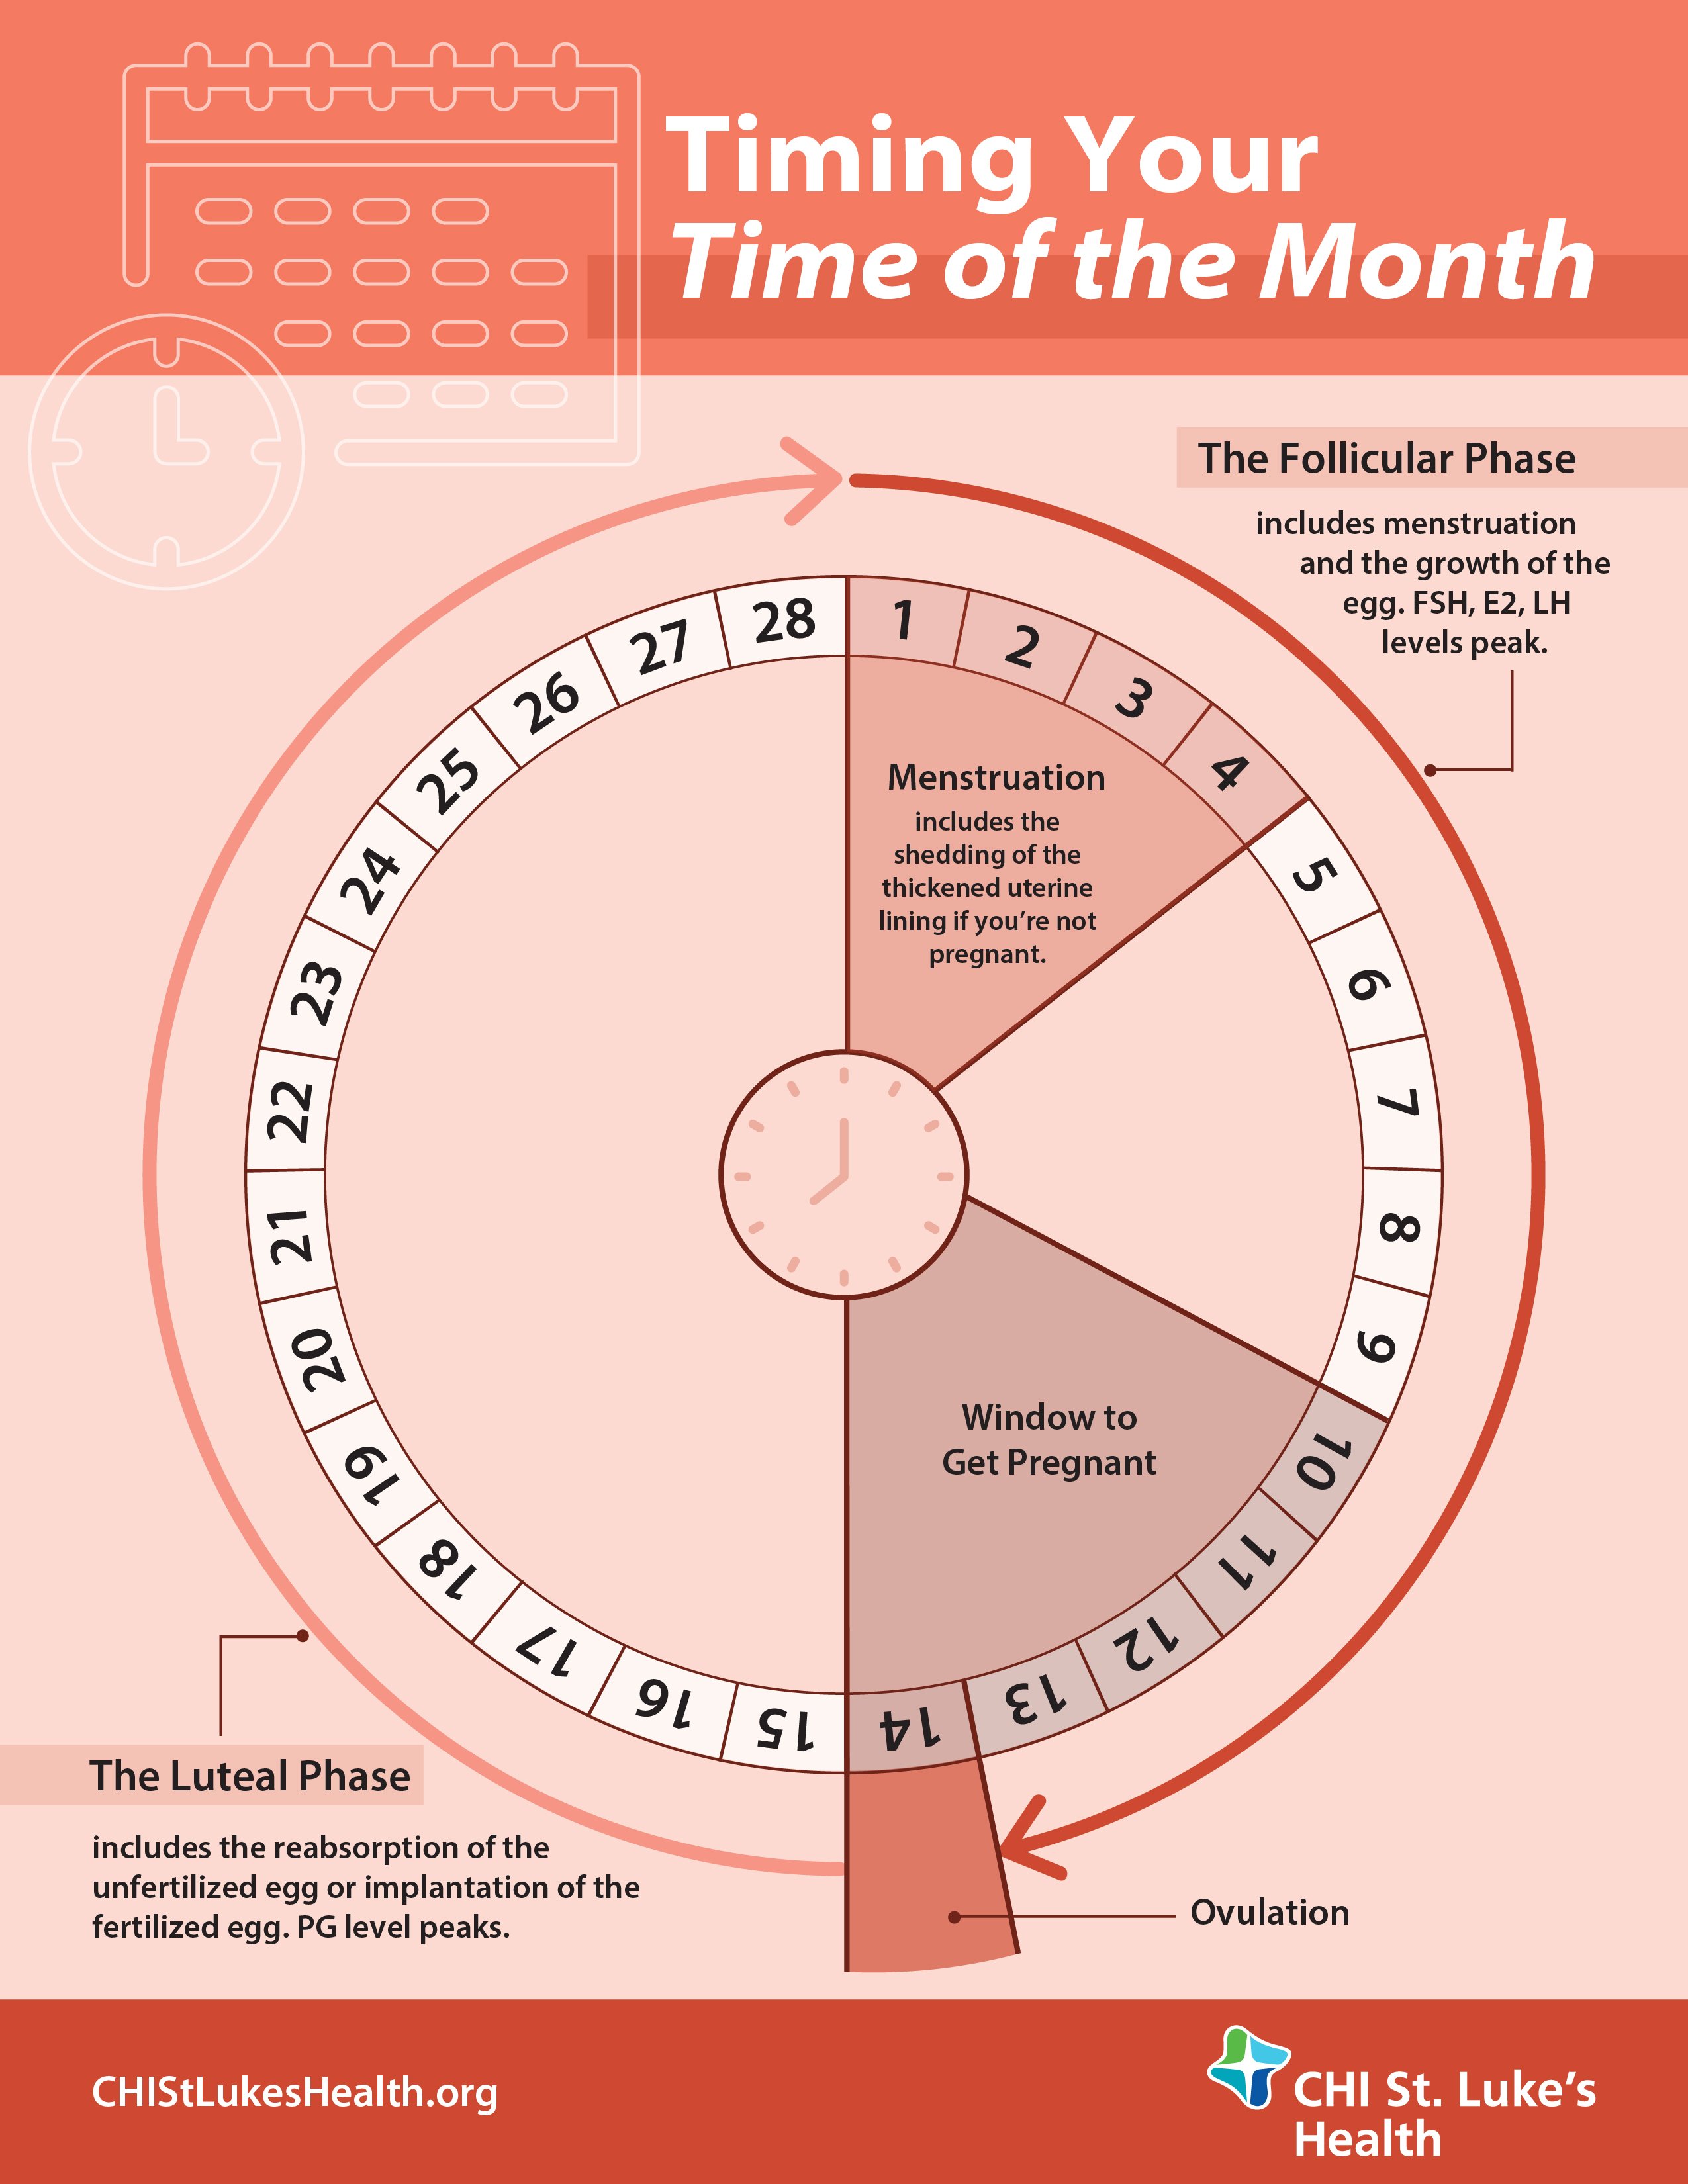 Chislh Design Menstrual Cycle Infographic May 20 